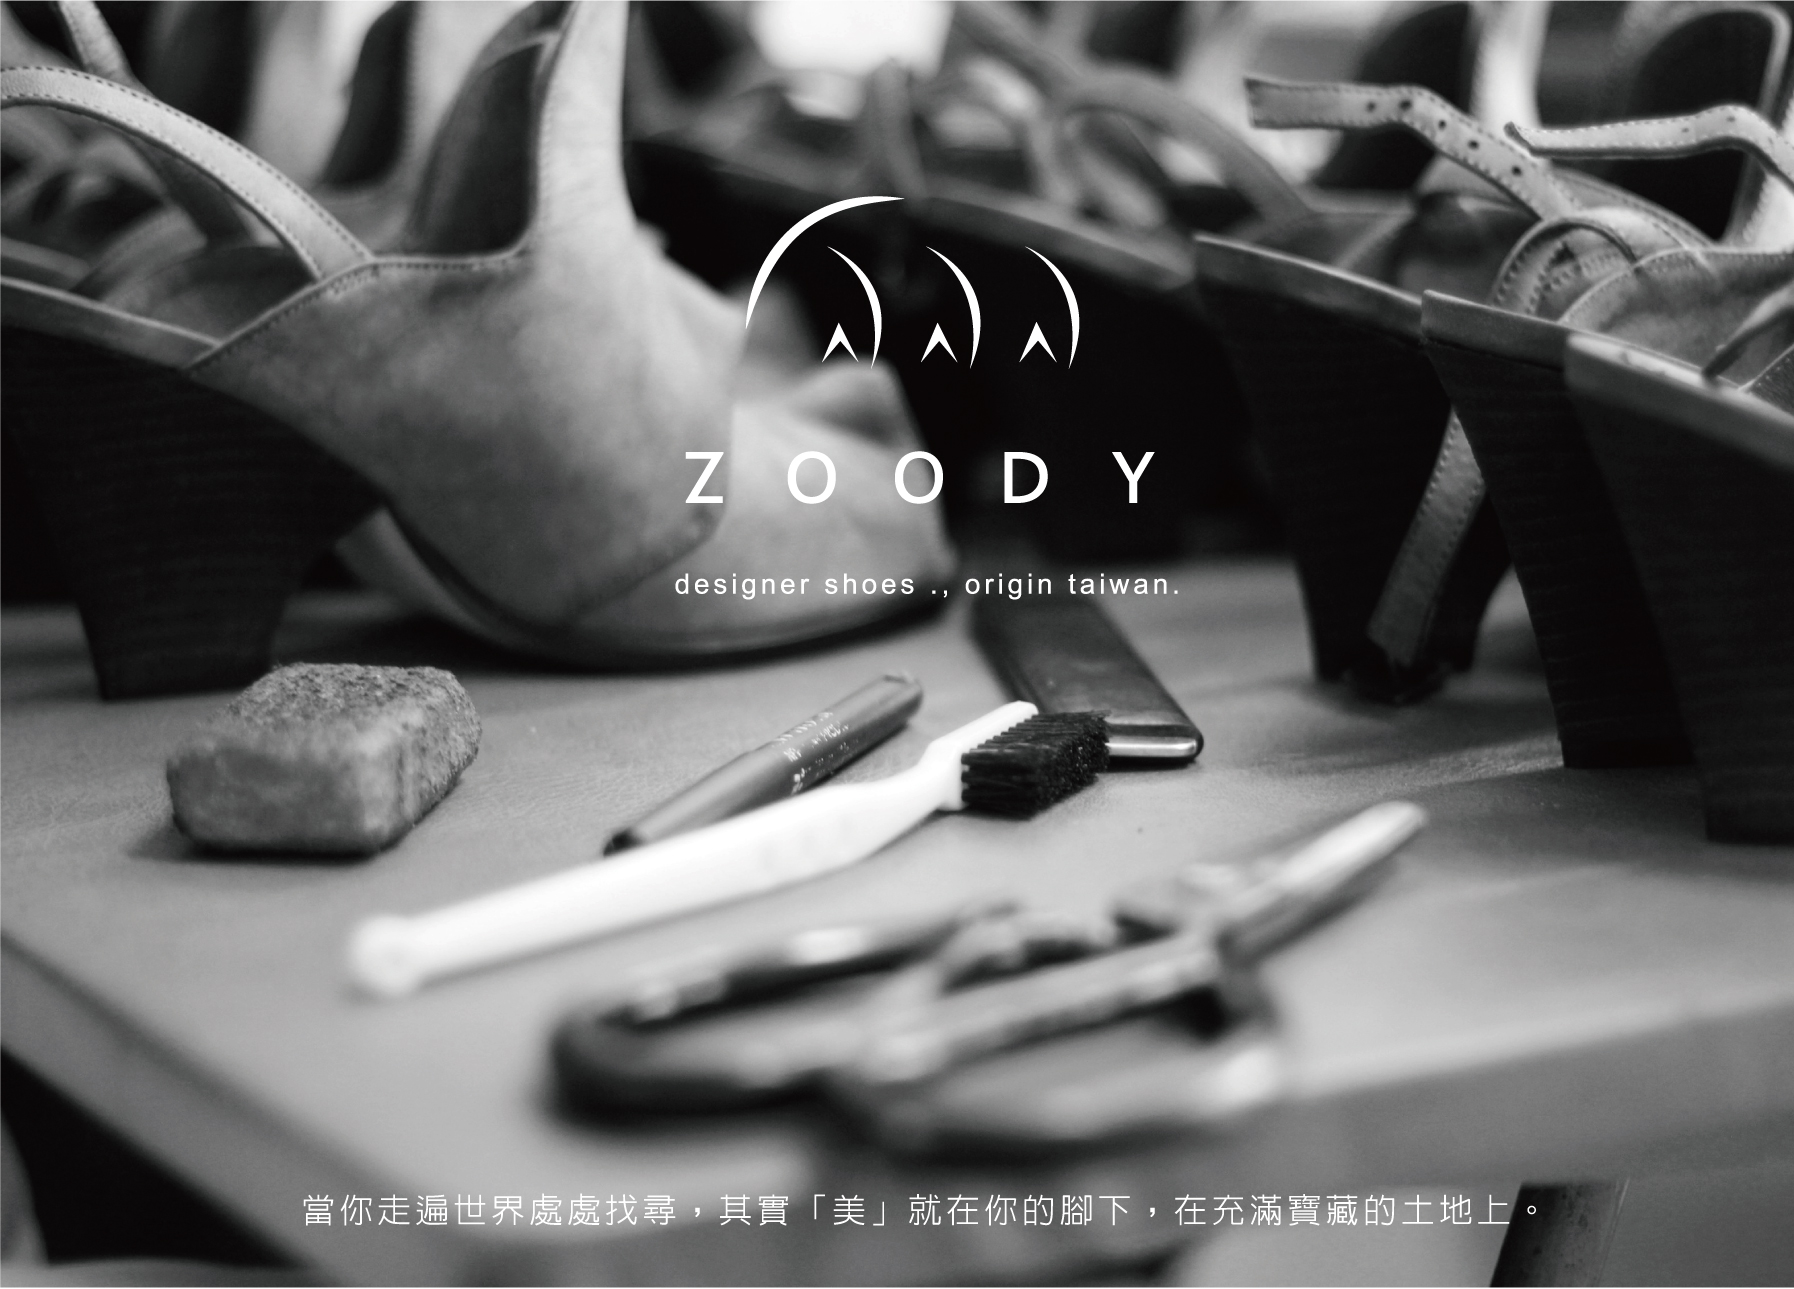 about ZOODY